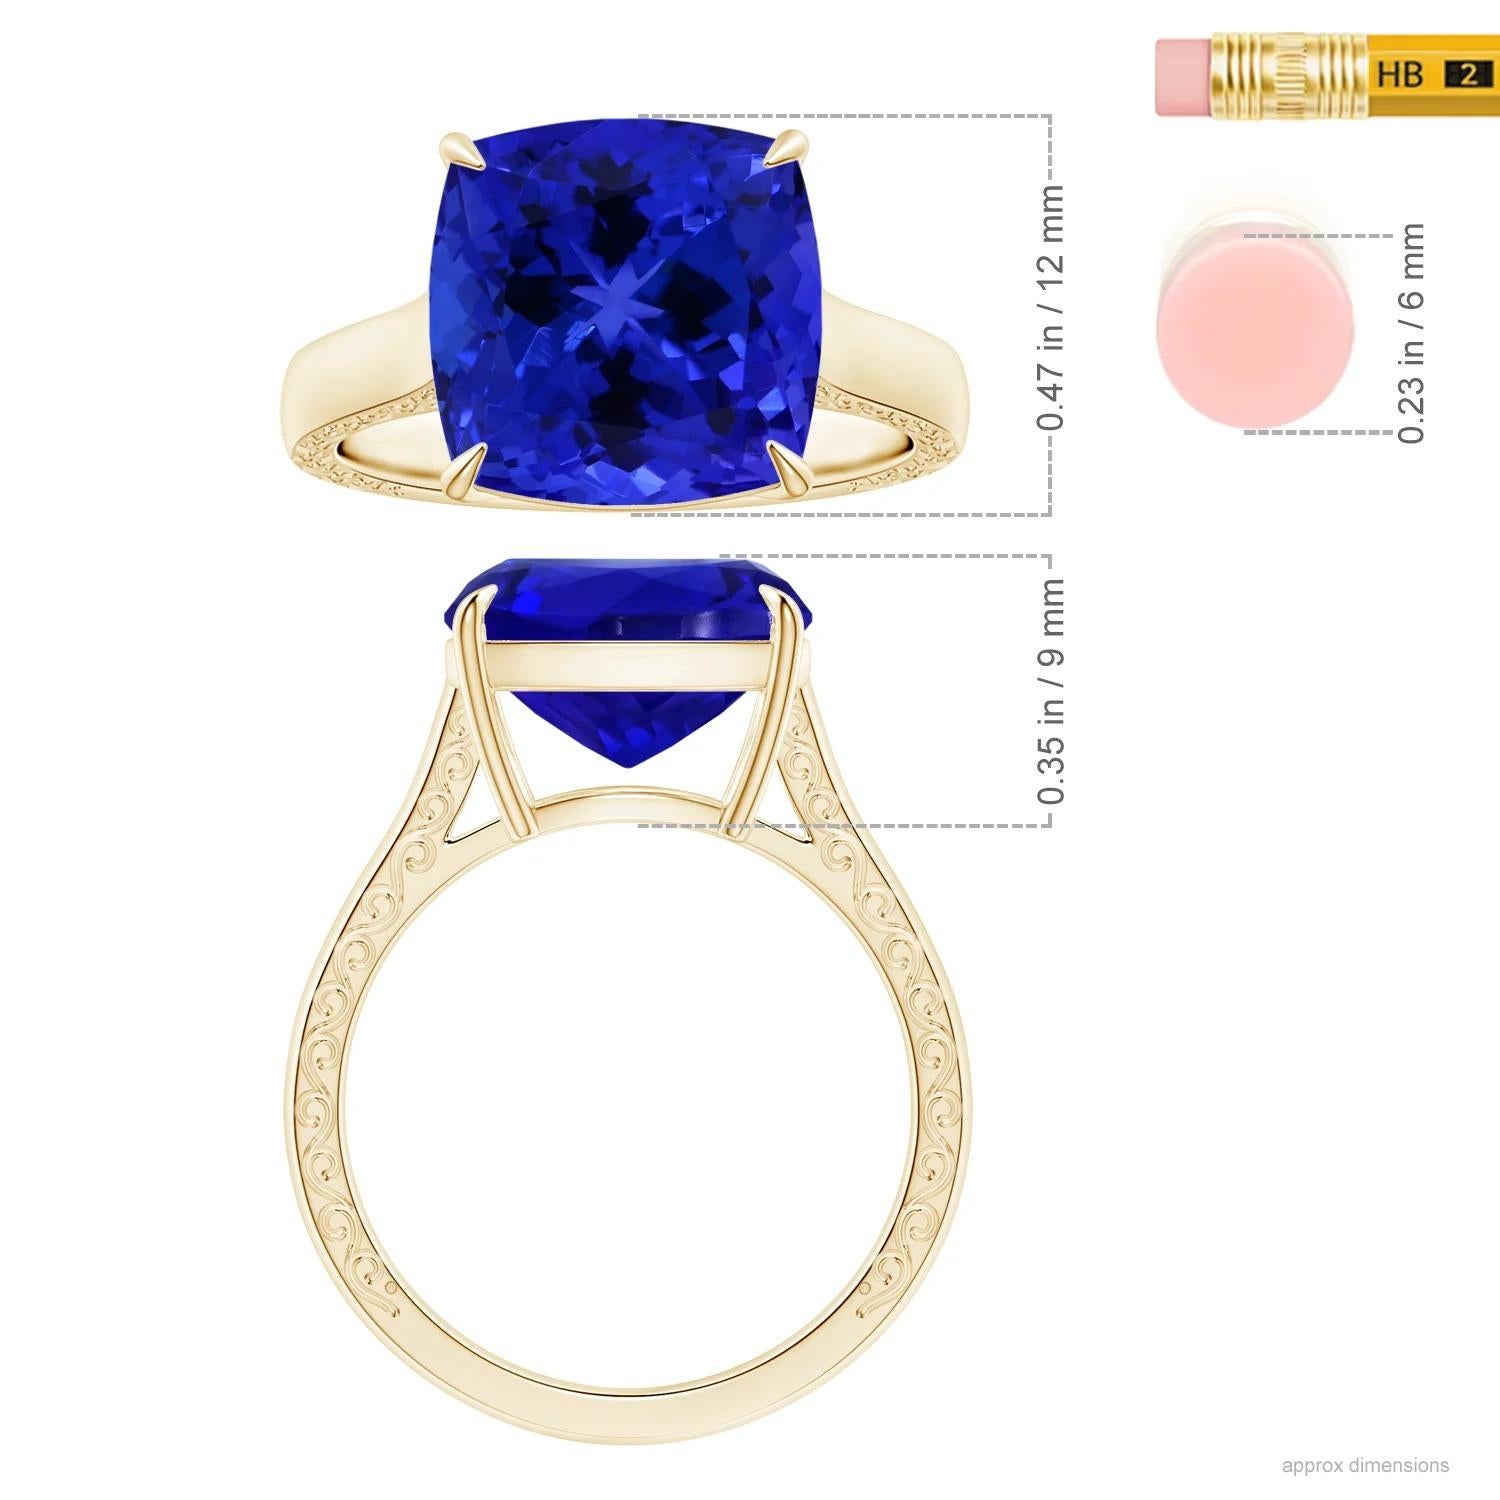 For Sale:  Angara Gia Certified Cushion Tanzanite Solitaire Ring in Yellow Gold 5